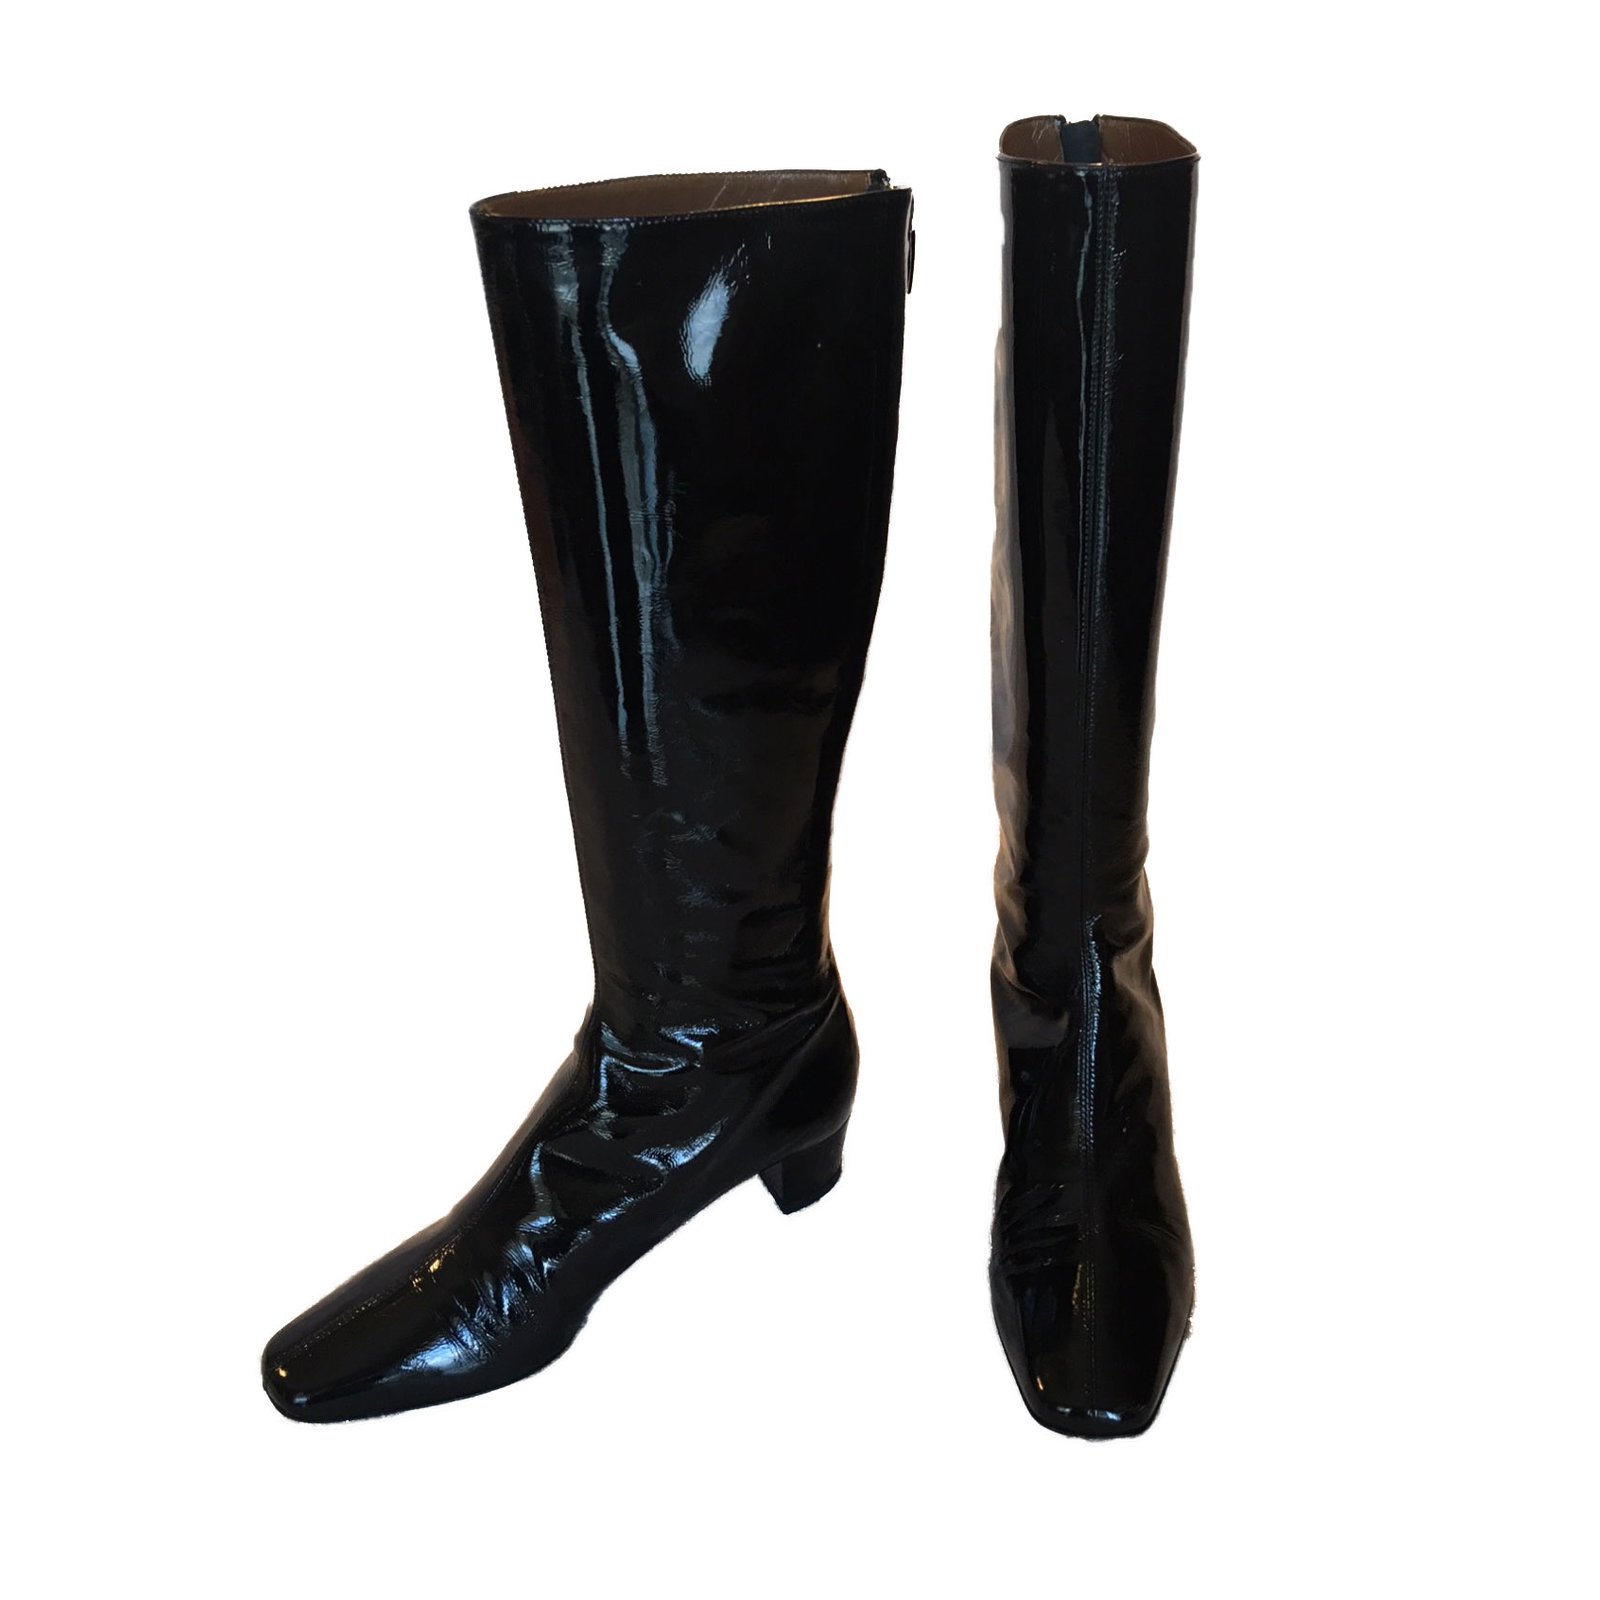 Hobbs Boots Boots Patent leather Black 